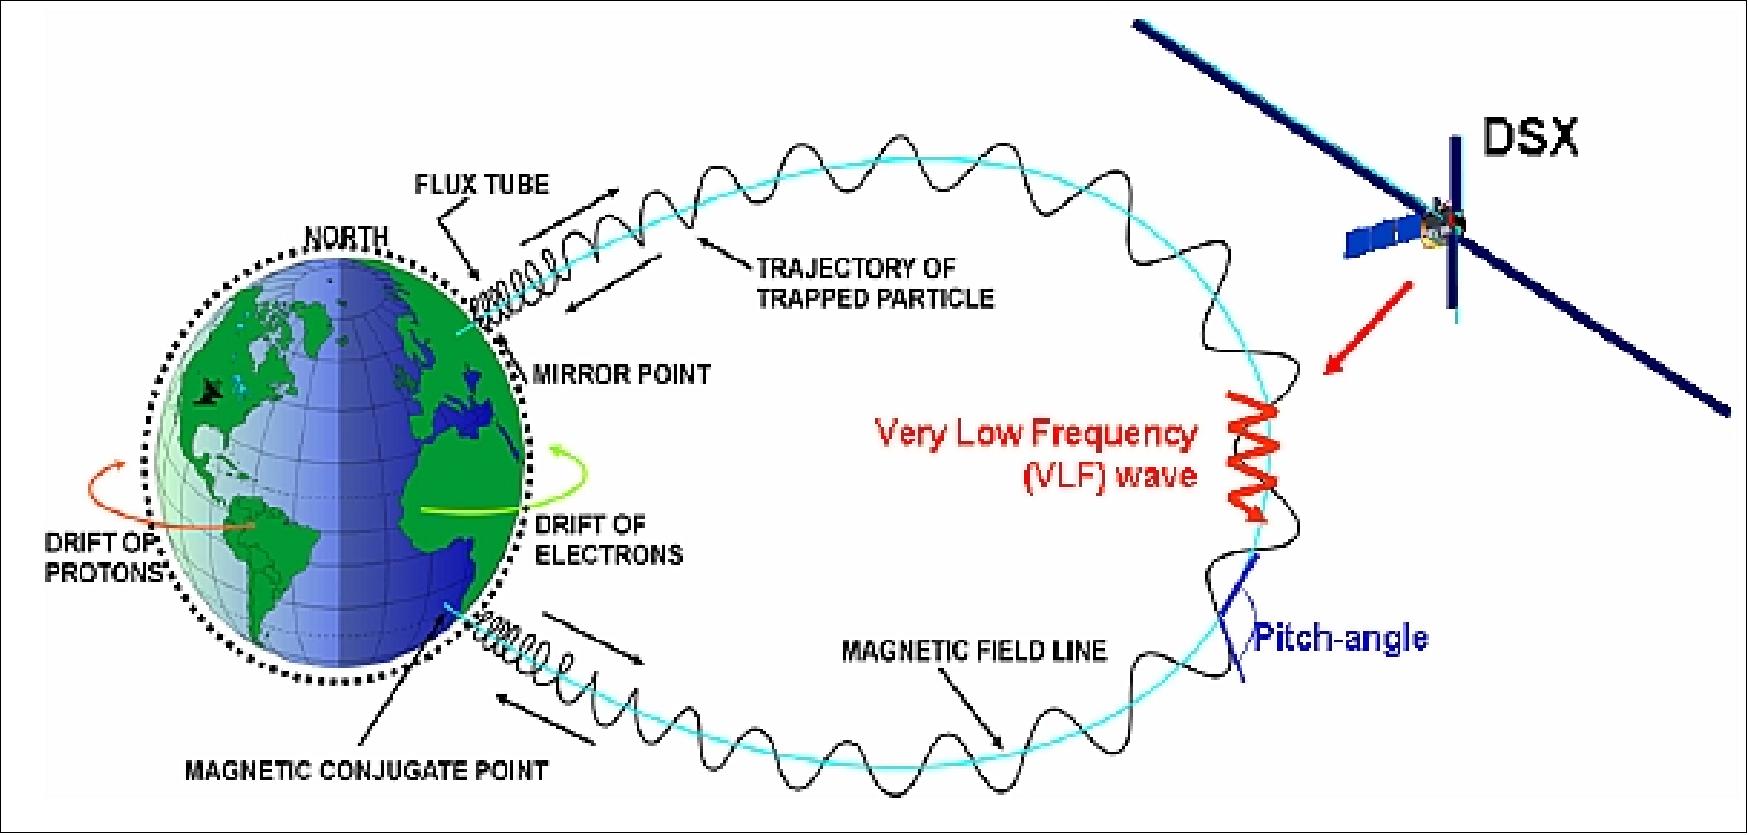 Figure 10: Conceptual illustration of the VLF wave particle interaction processes (image credit: AFRL)